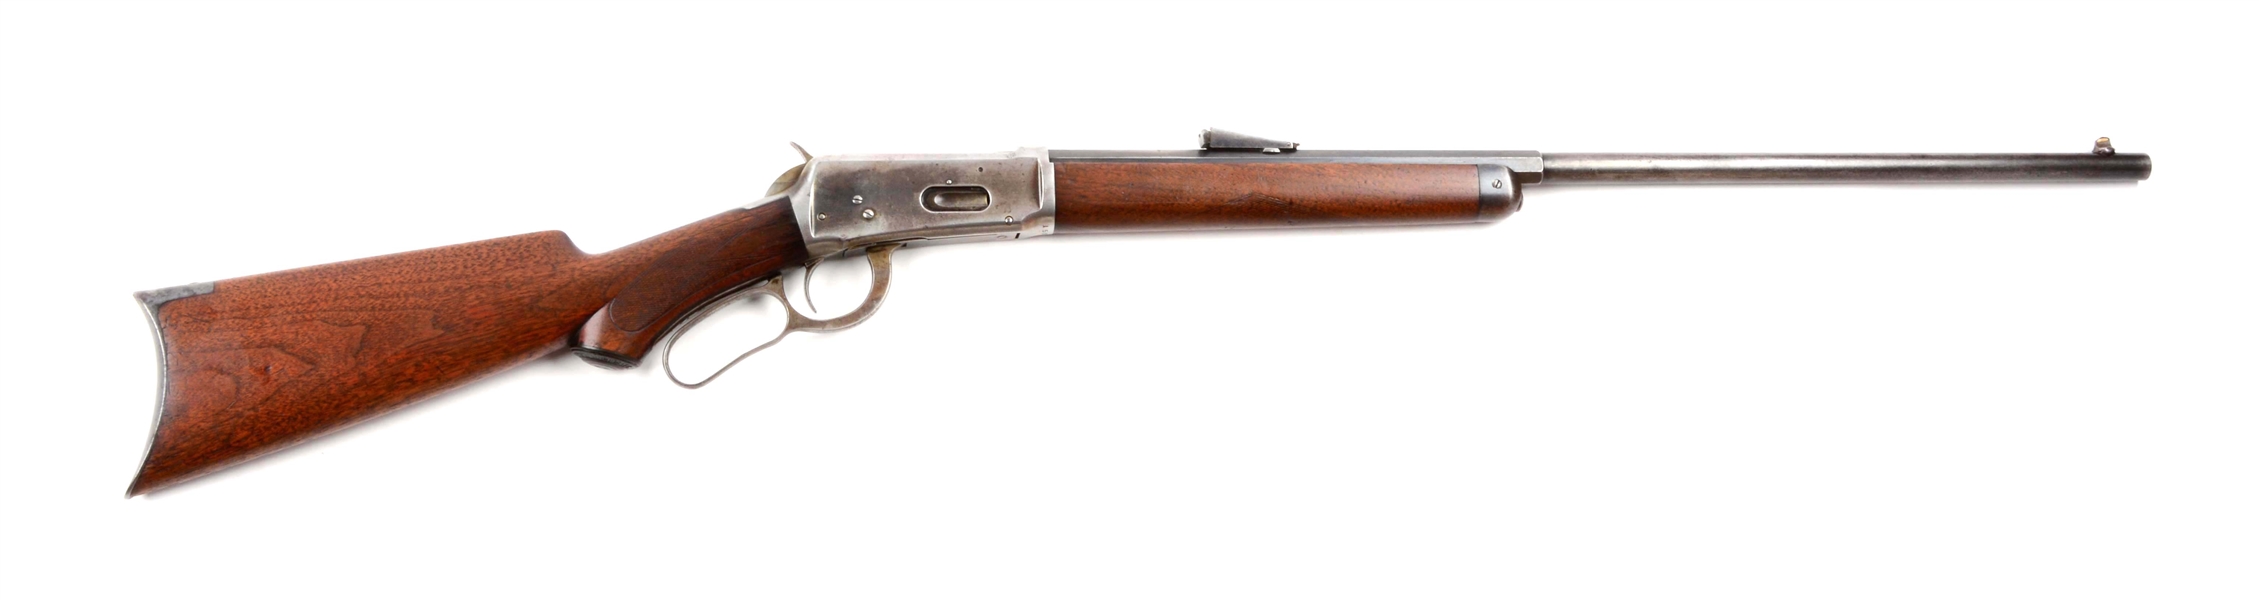 (C) SPECIAL ORDER SEMI-DELUXE WINCHESTER MODEL 1894 LEVER ACTION RIFLE.